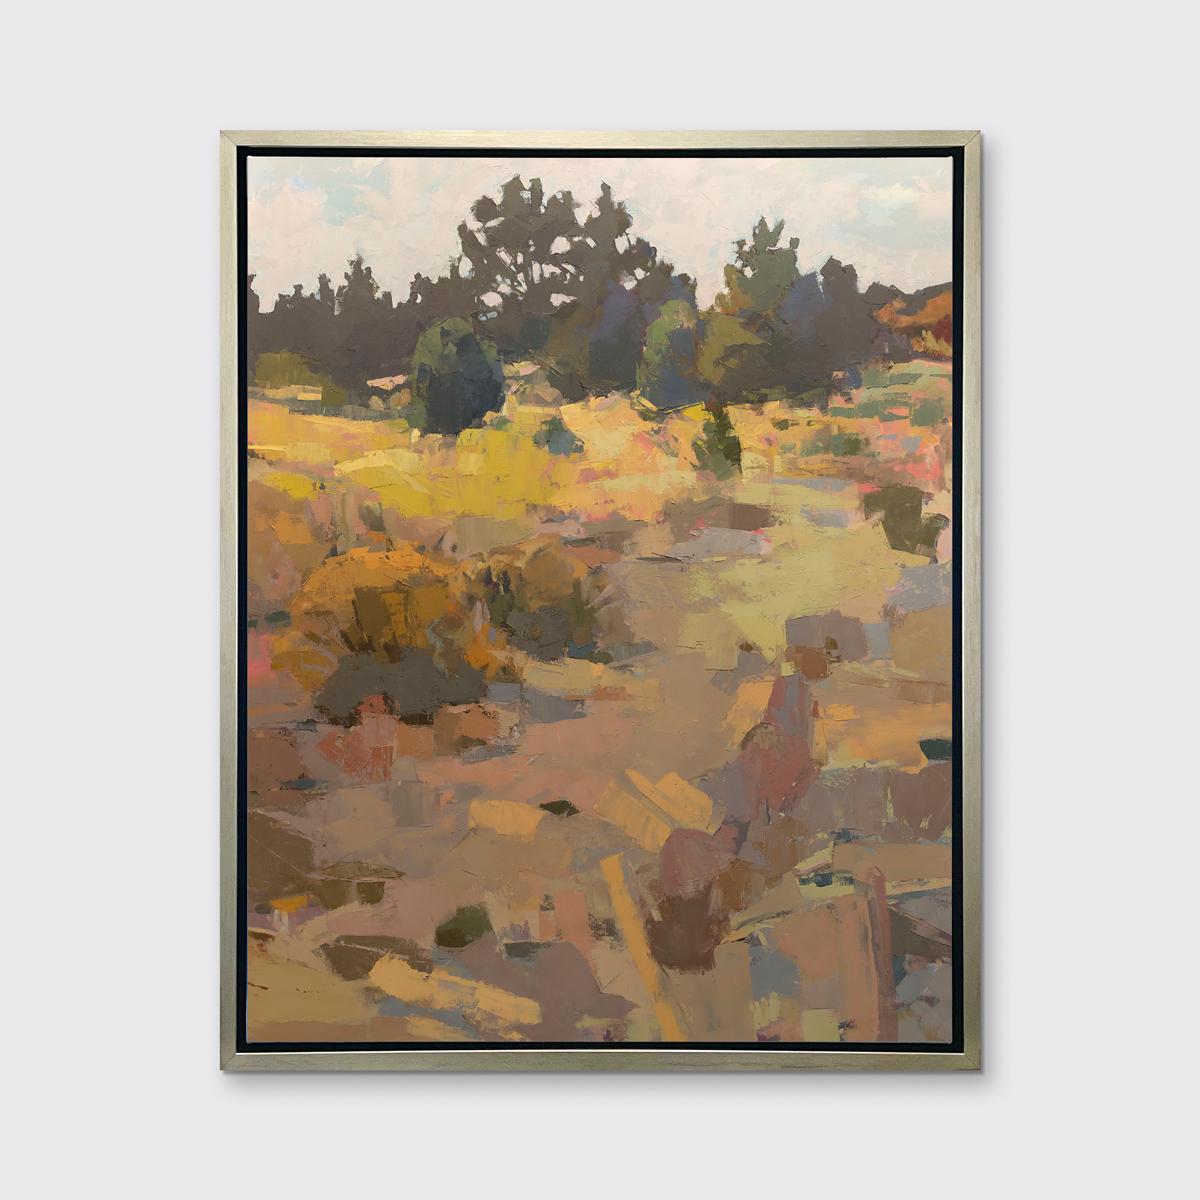 Bri Custer Landscape Print - "Short of Expectations" Framed Limited Edition Print, 60" x 48"